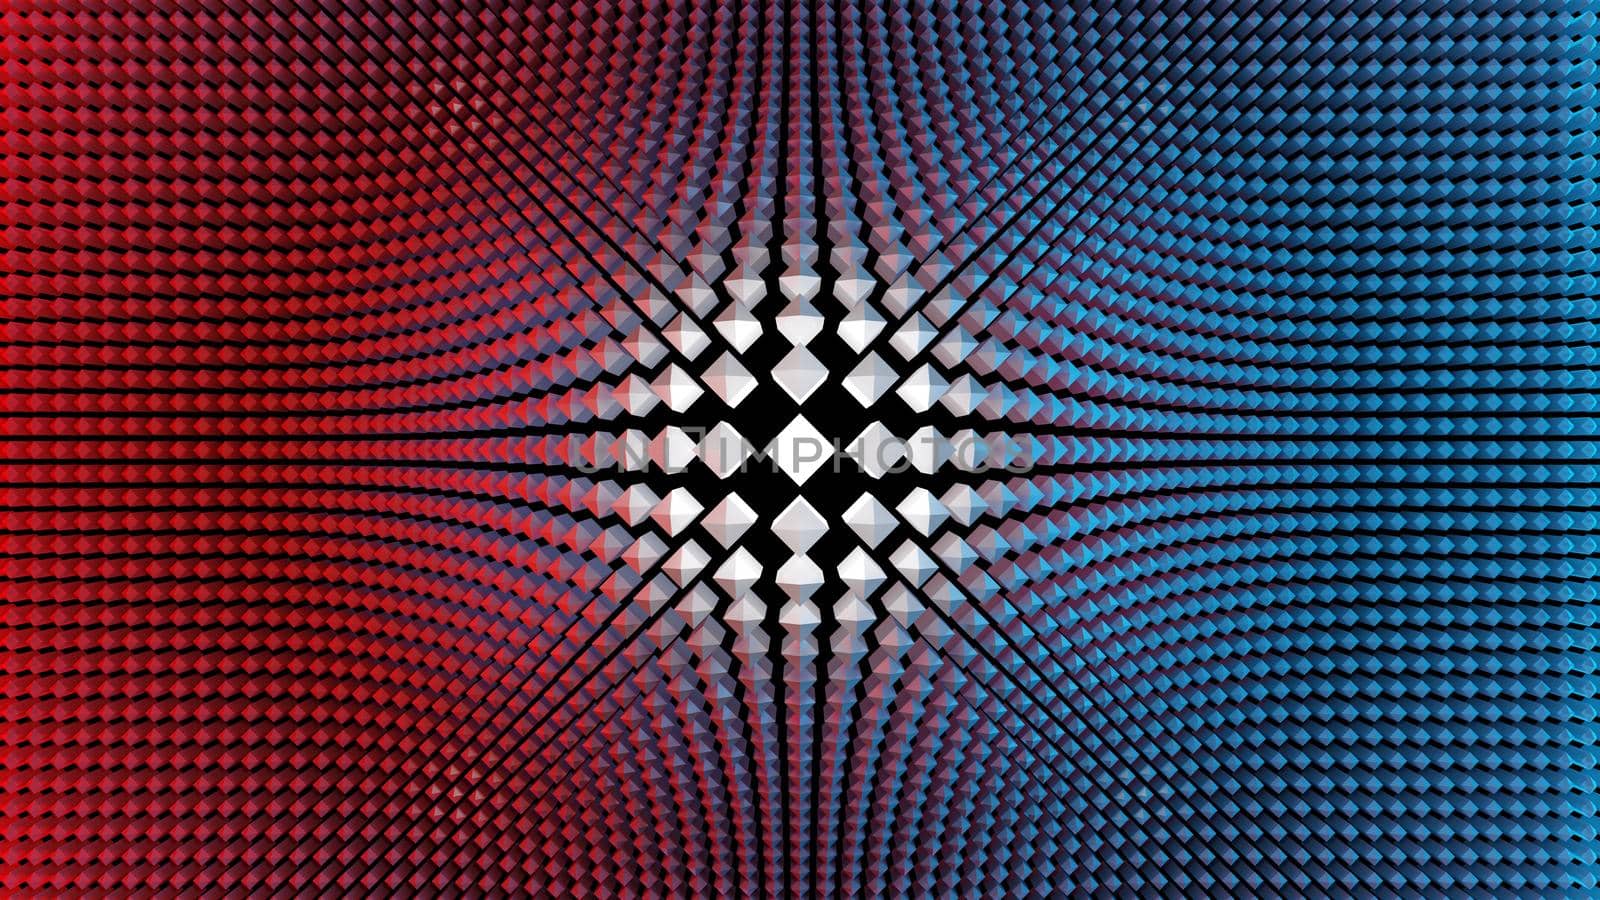 Bright white geometrical shape at the center of a blue and red pattern. Central point, abstract concept. Digital 3D render. by hernan_hyper